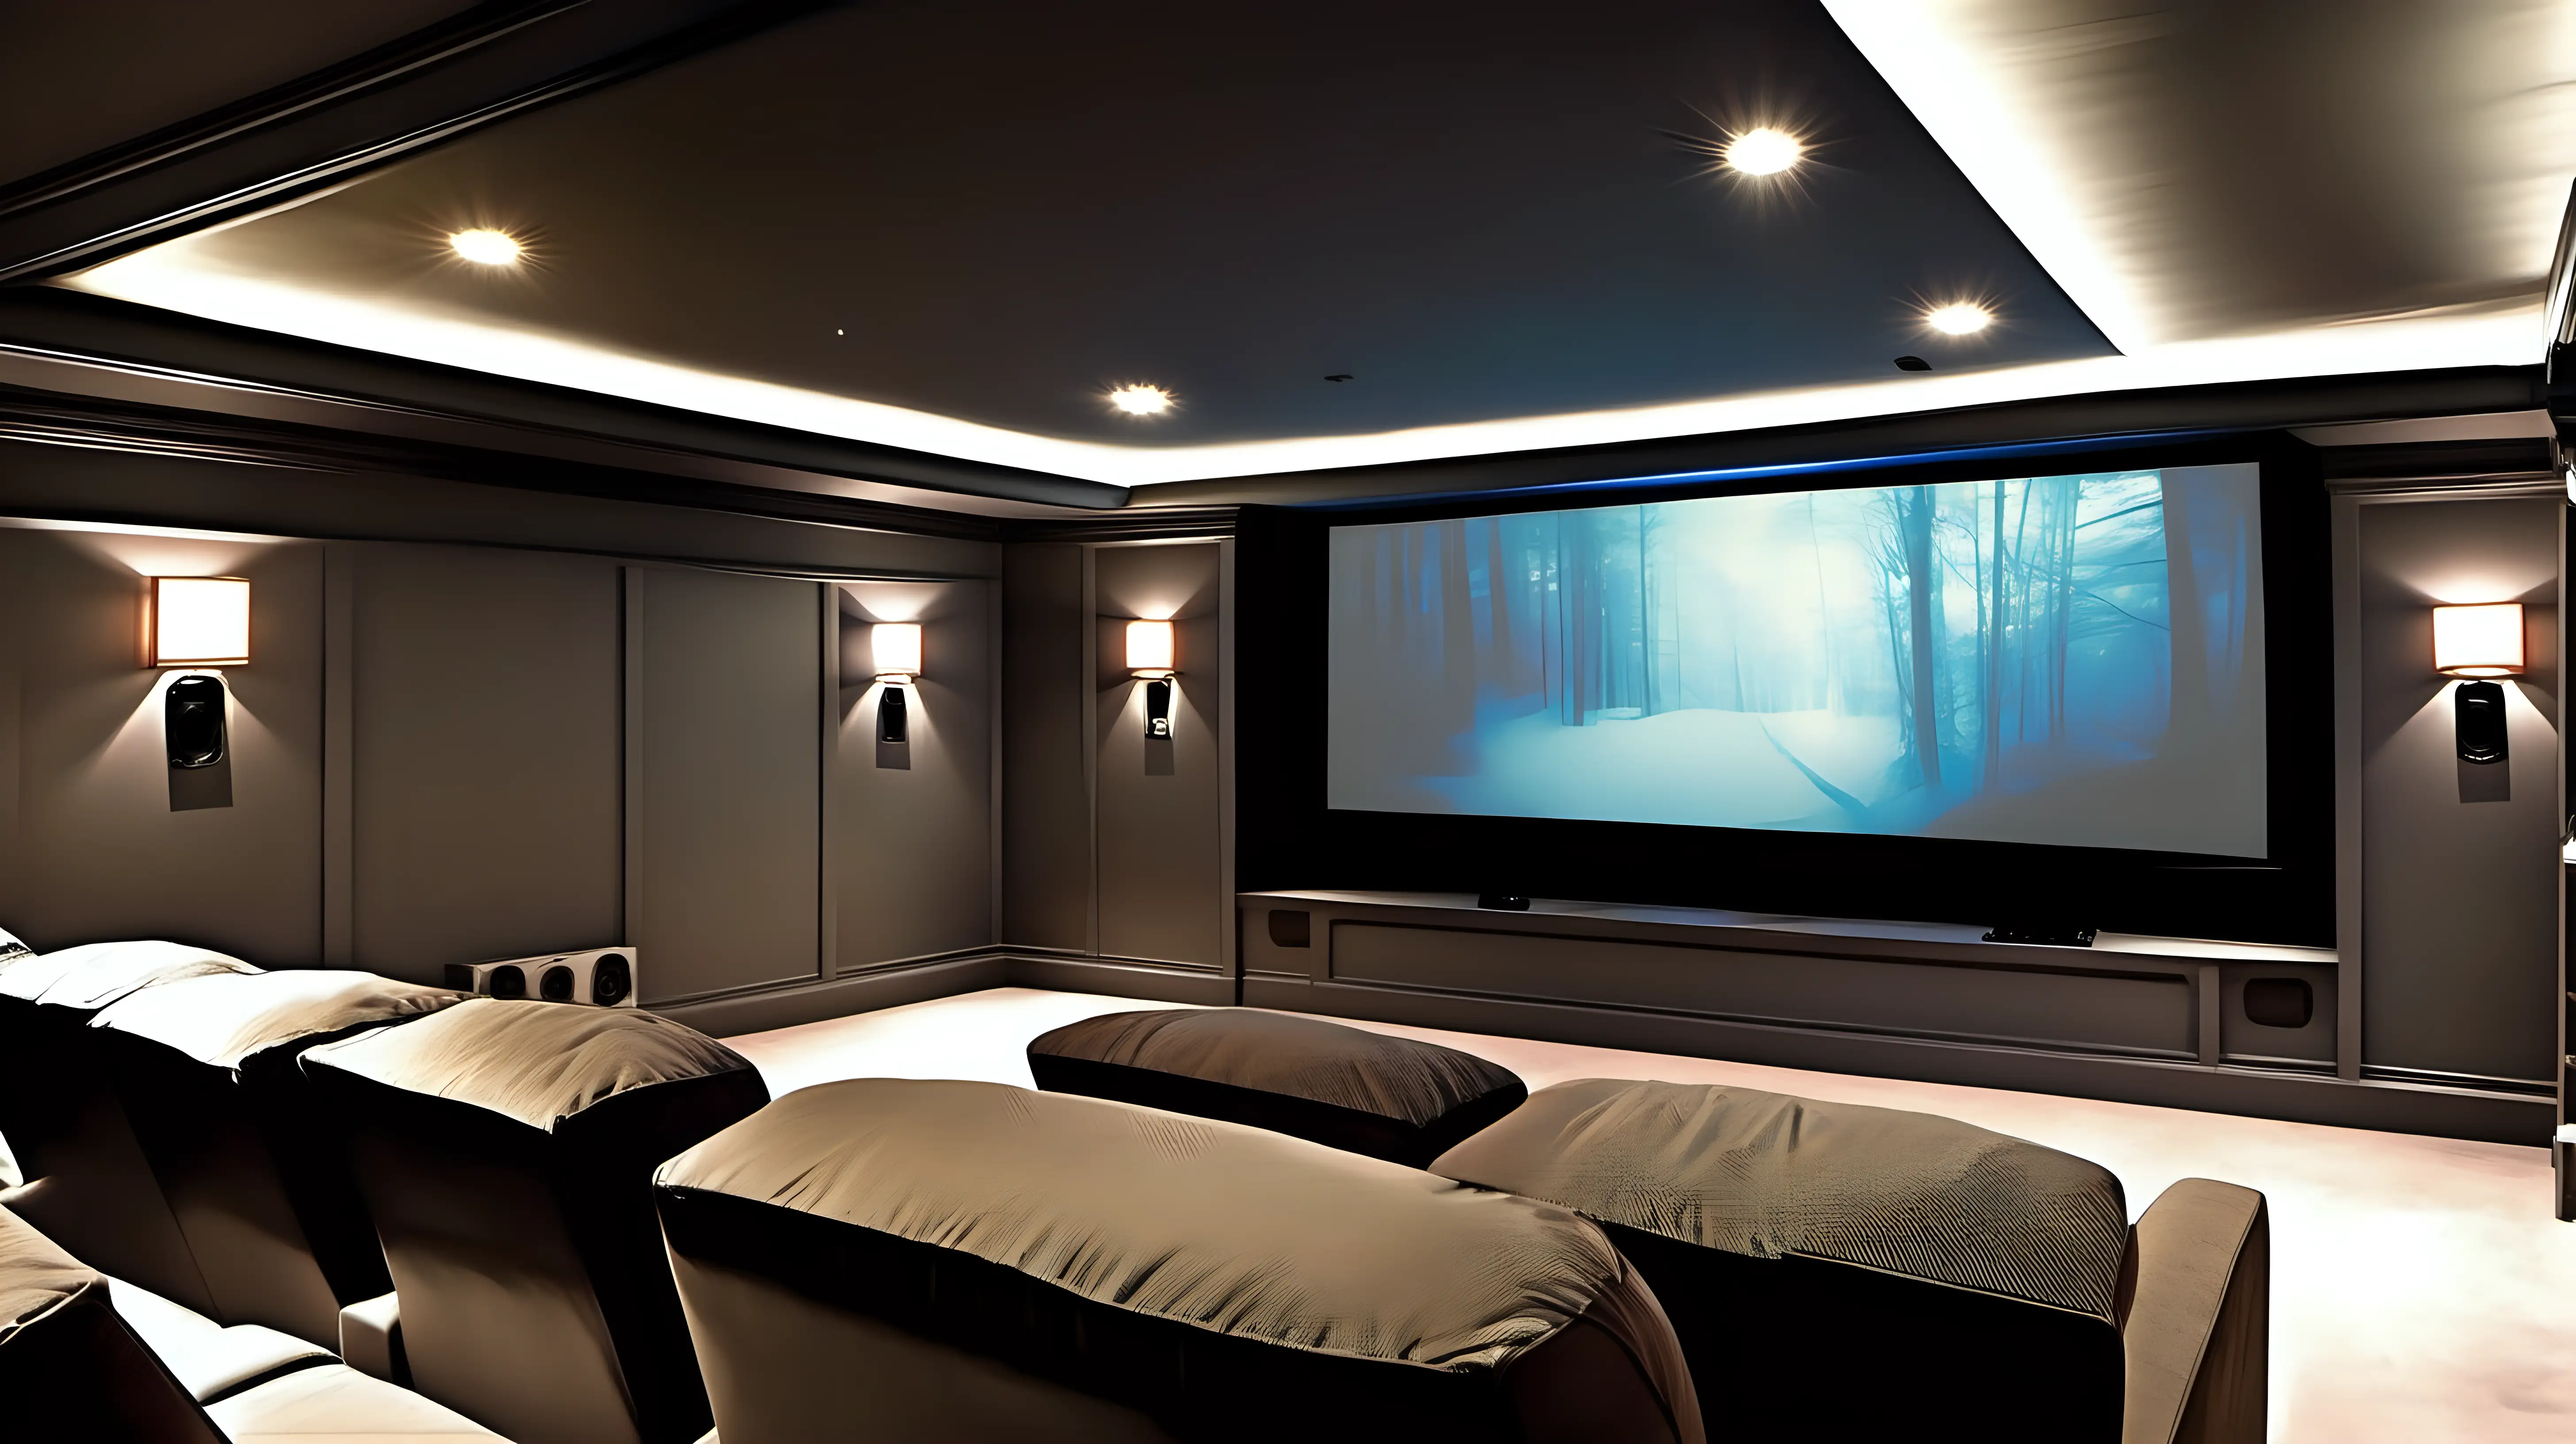 Inviting Home Theater with Comfortable Seating and Ambient Lighting